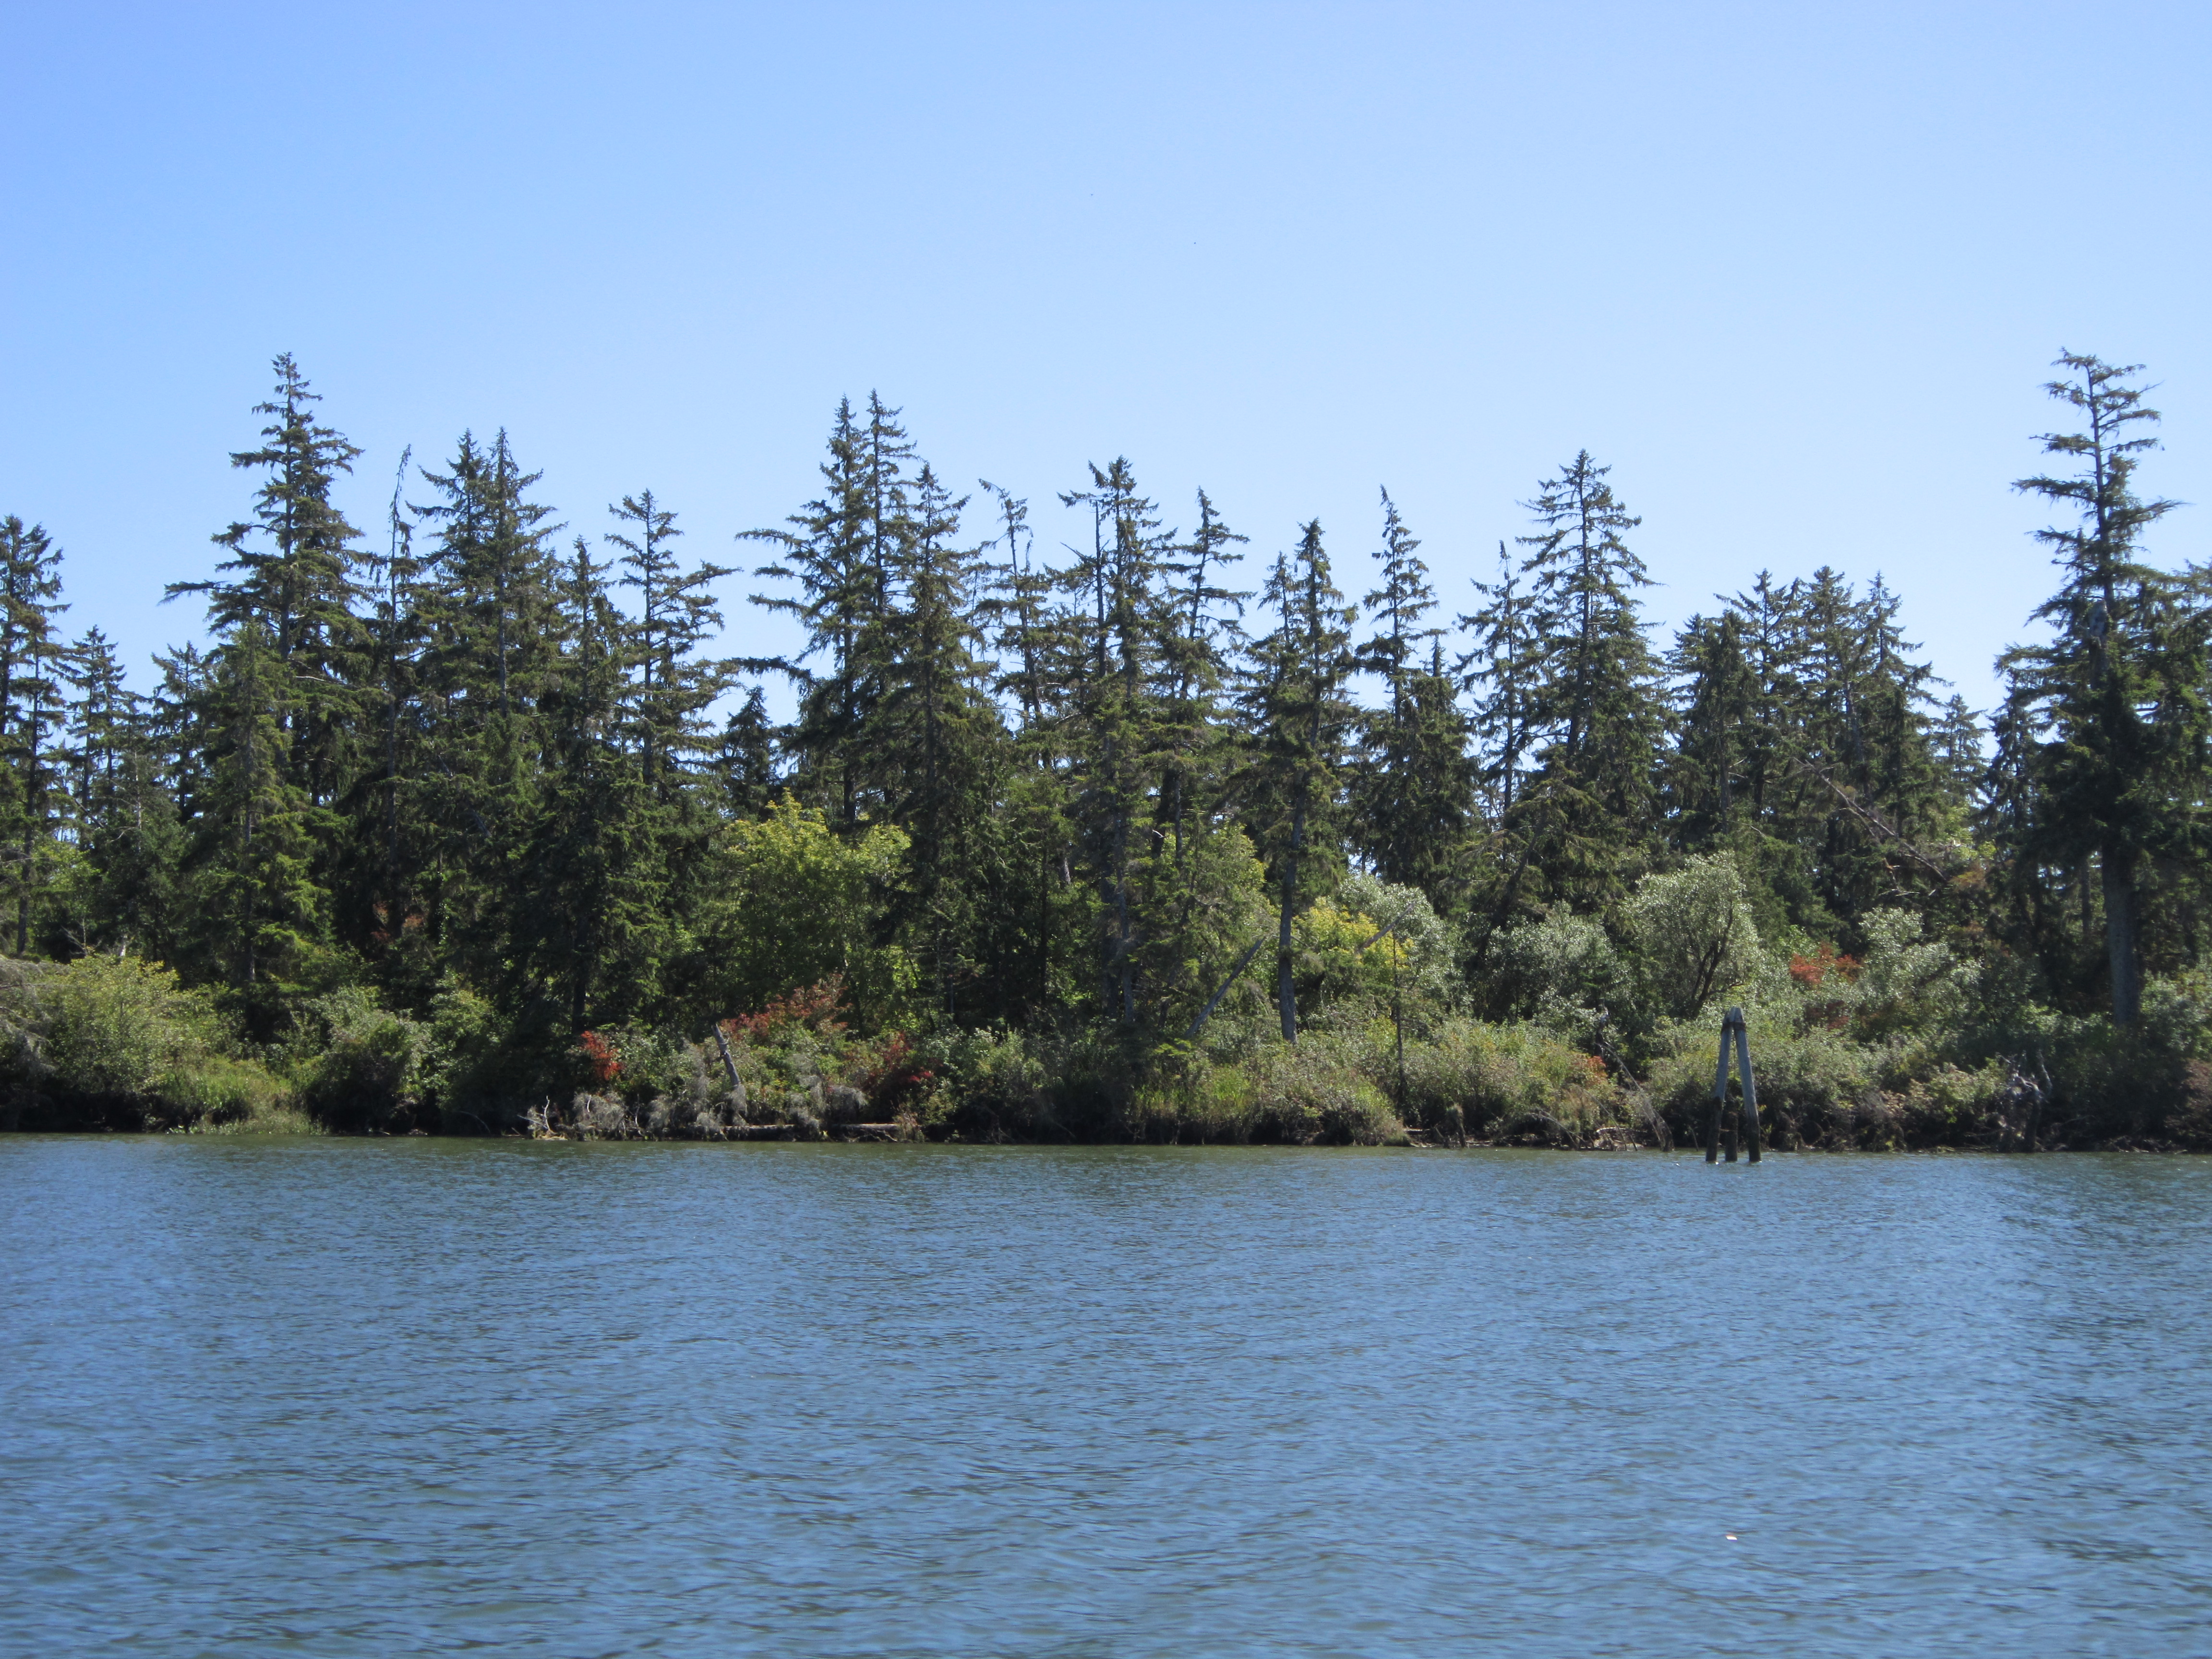 Water of the Columbia River in the foreground with a view of a forested island.